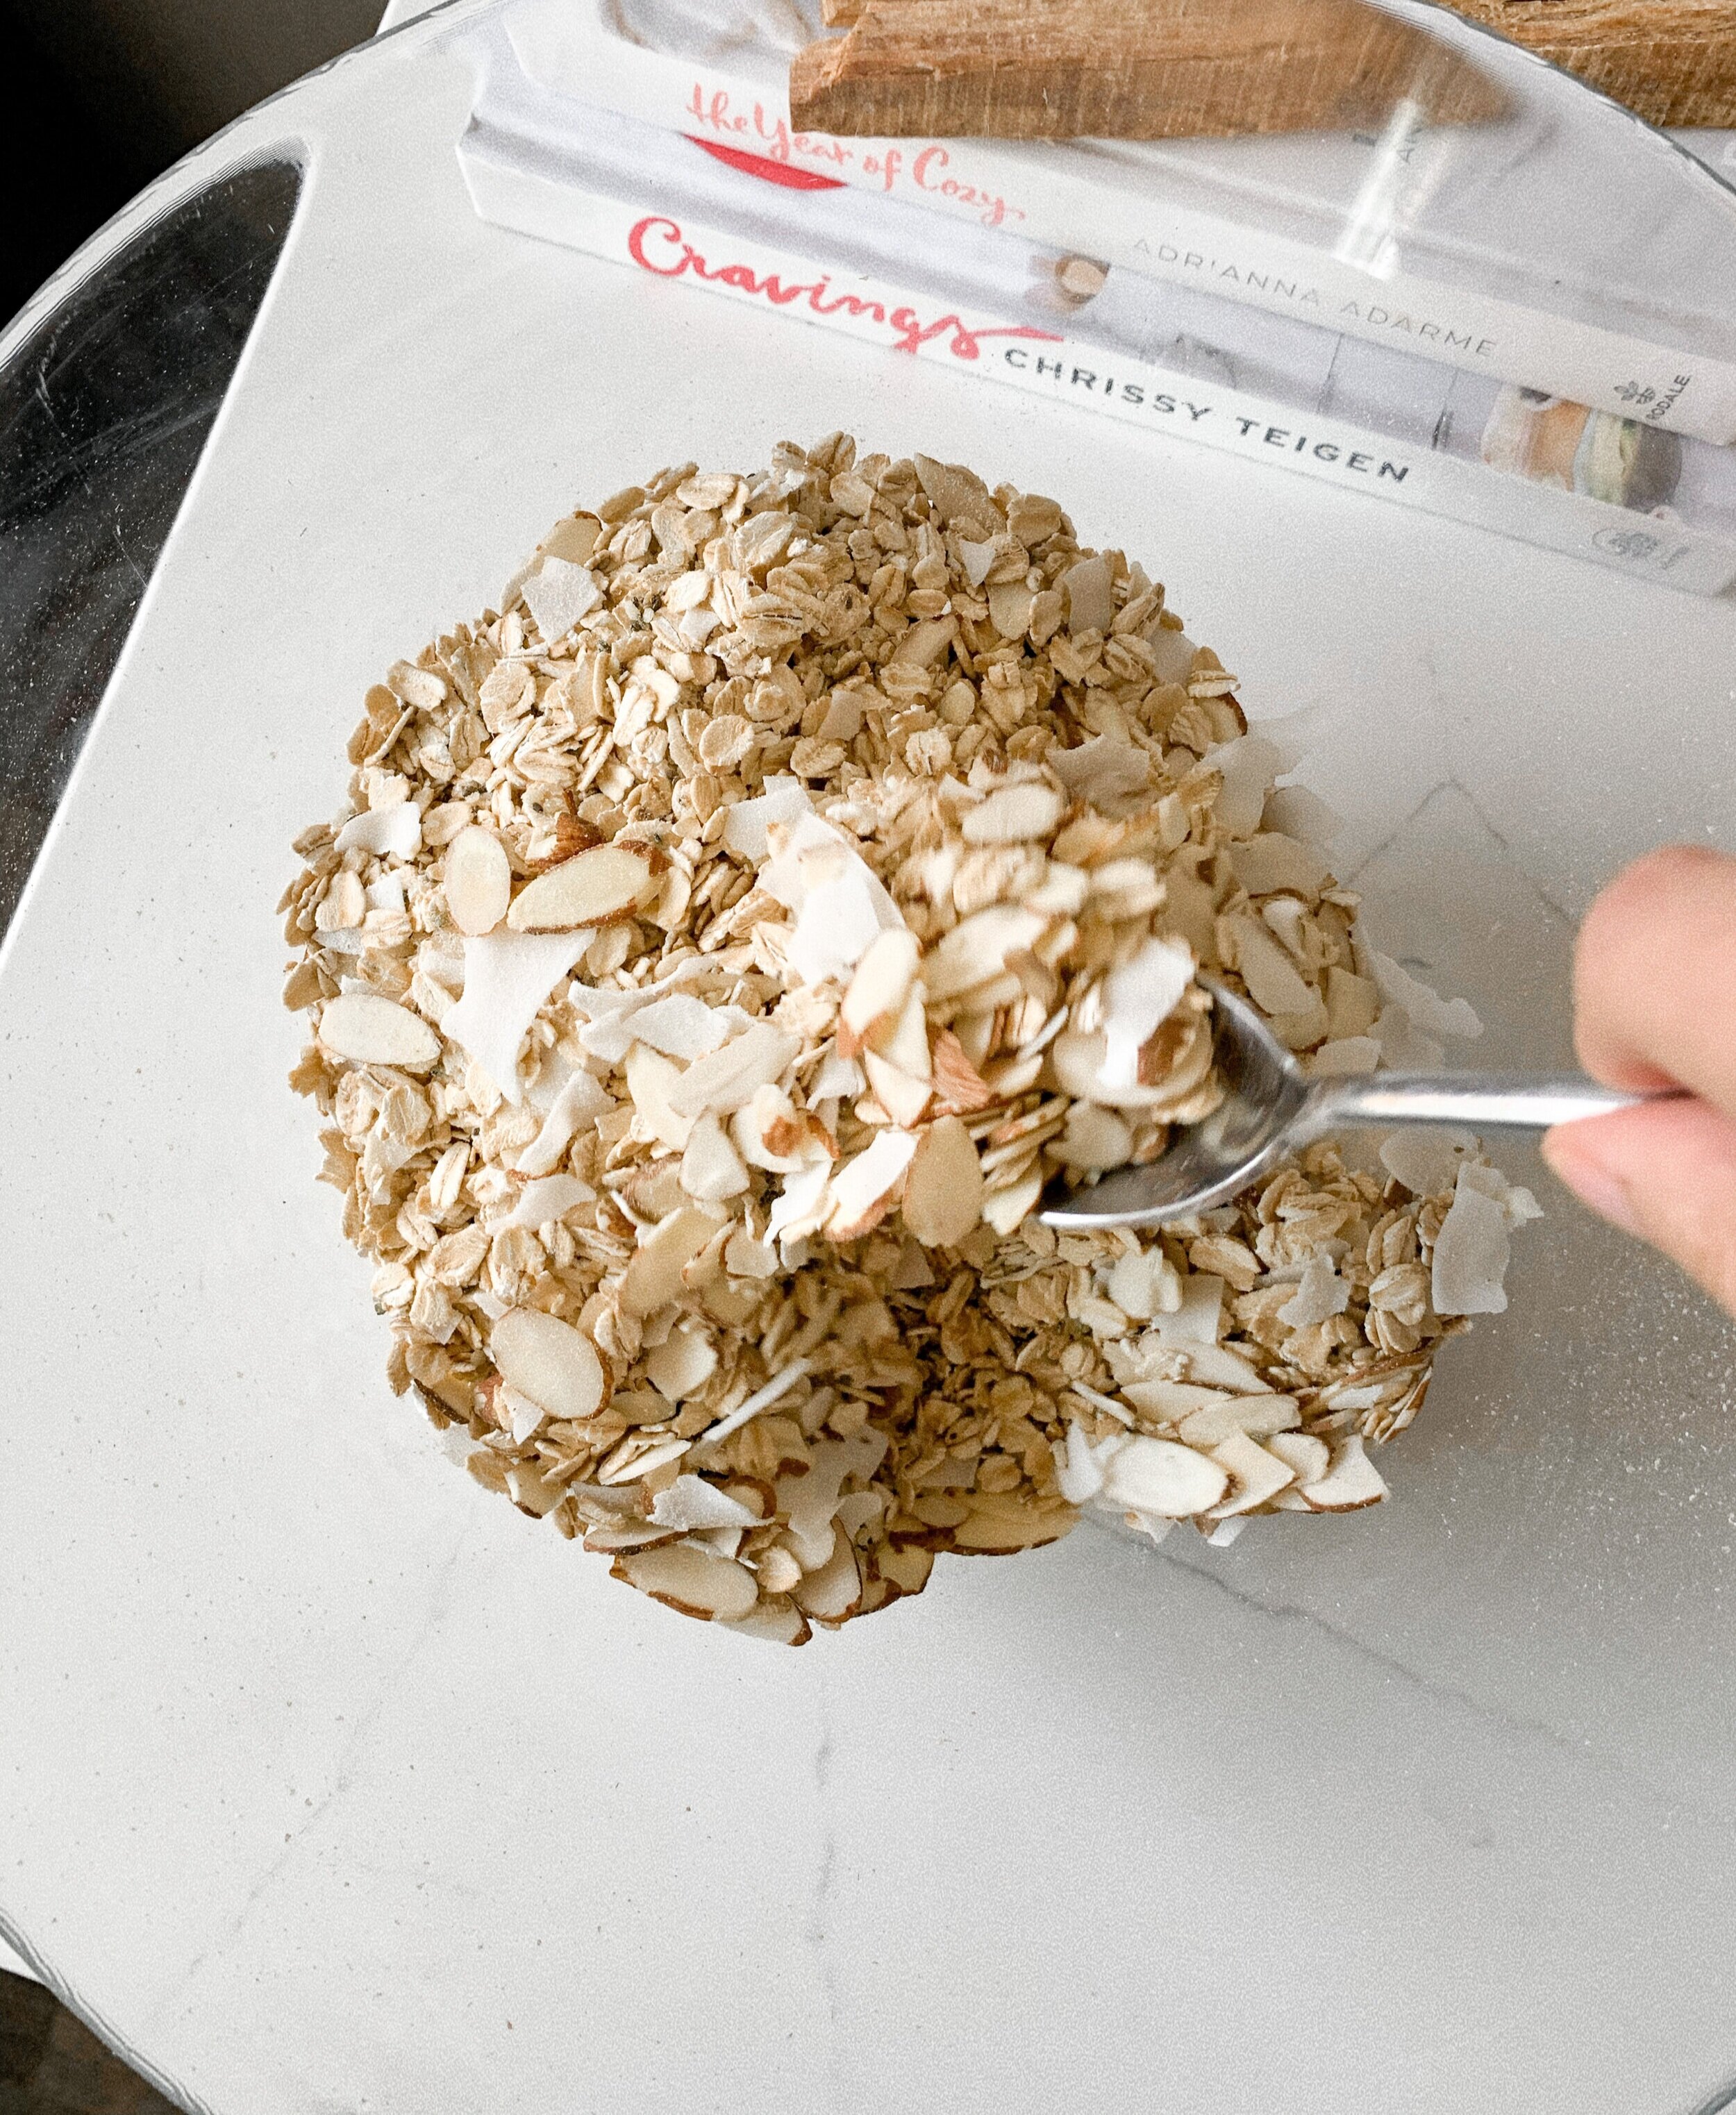 Mixing the homemade coconut cranberry granola ingredients in a mixing bowl